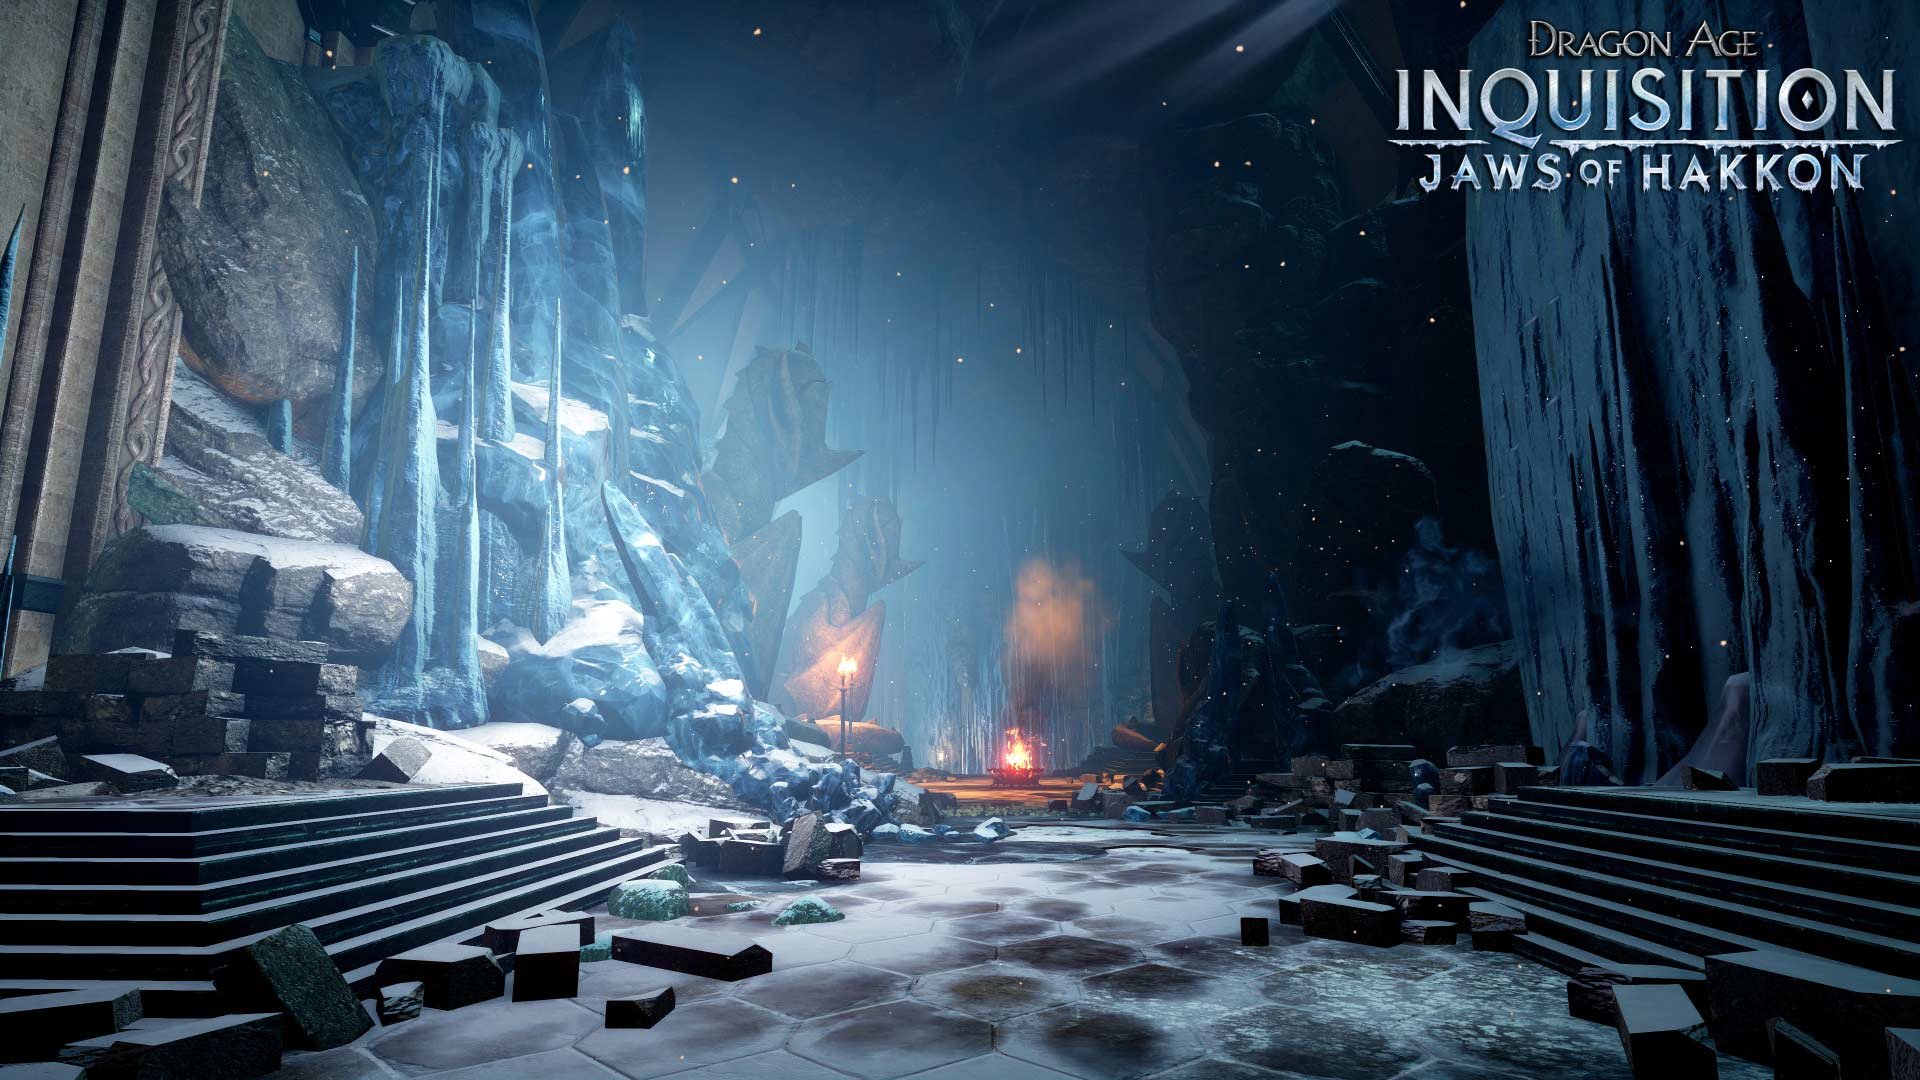 dragon age inquisition download size